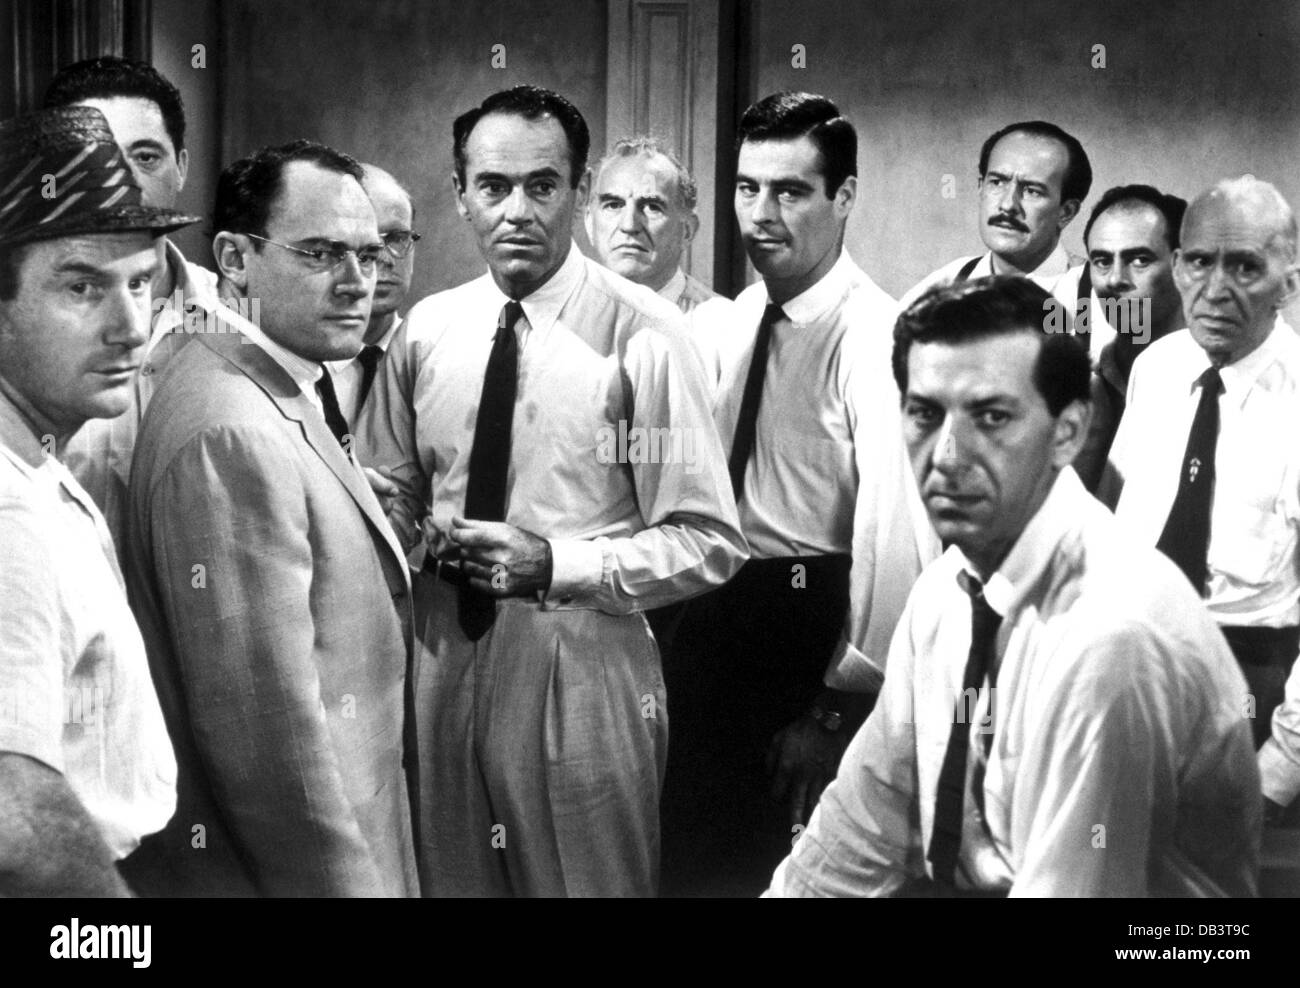 12 ANGRY MEN HENRY FONDA 8X10 GLOSSY PHOTO PICTURE IMAGE #2 